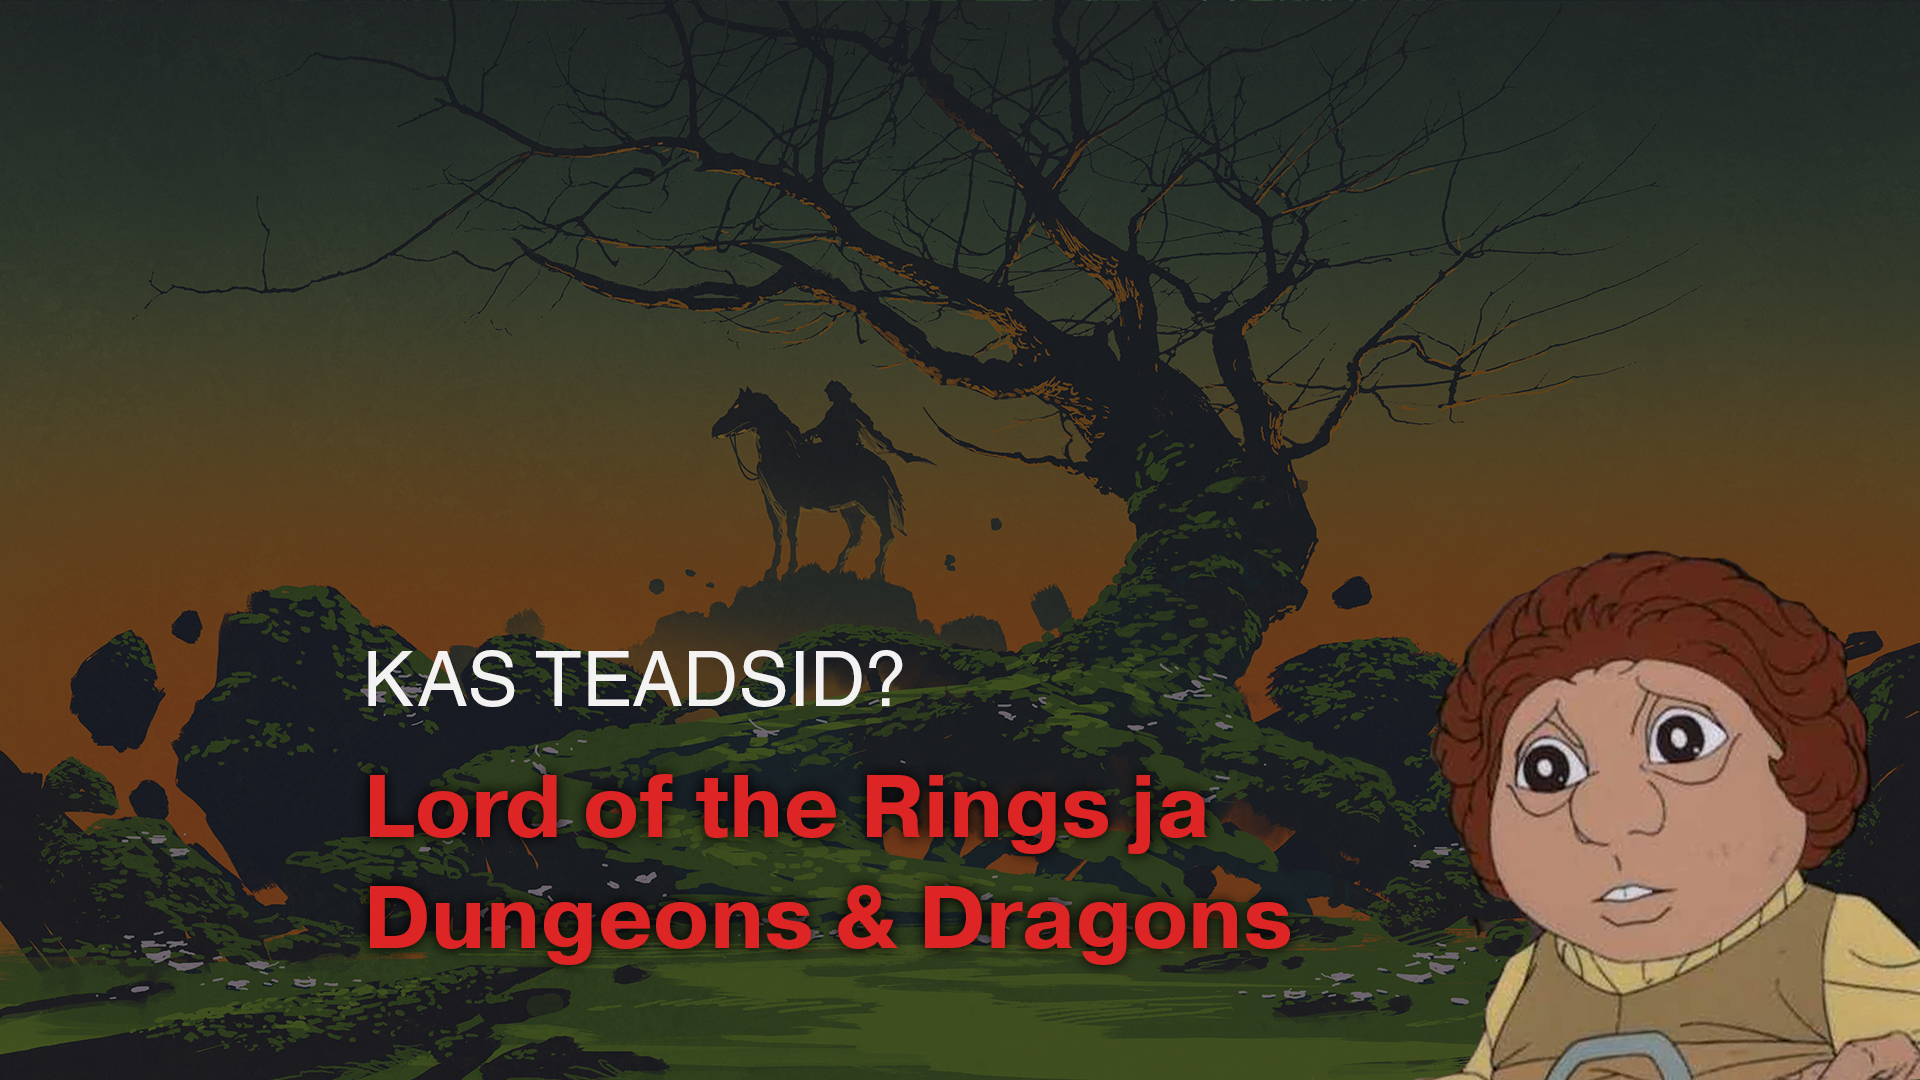 Video: Lord of the Rings ja Dungeons & Dragons